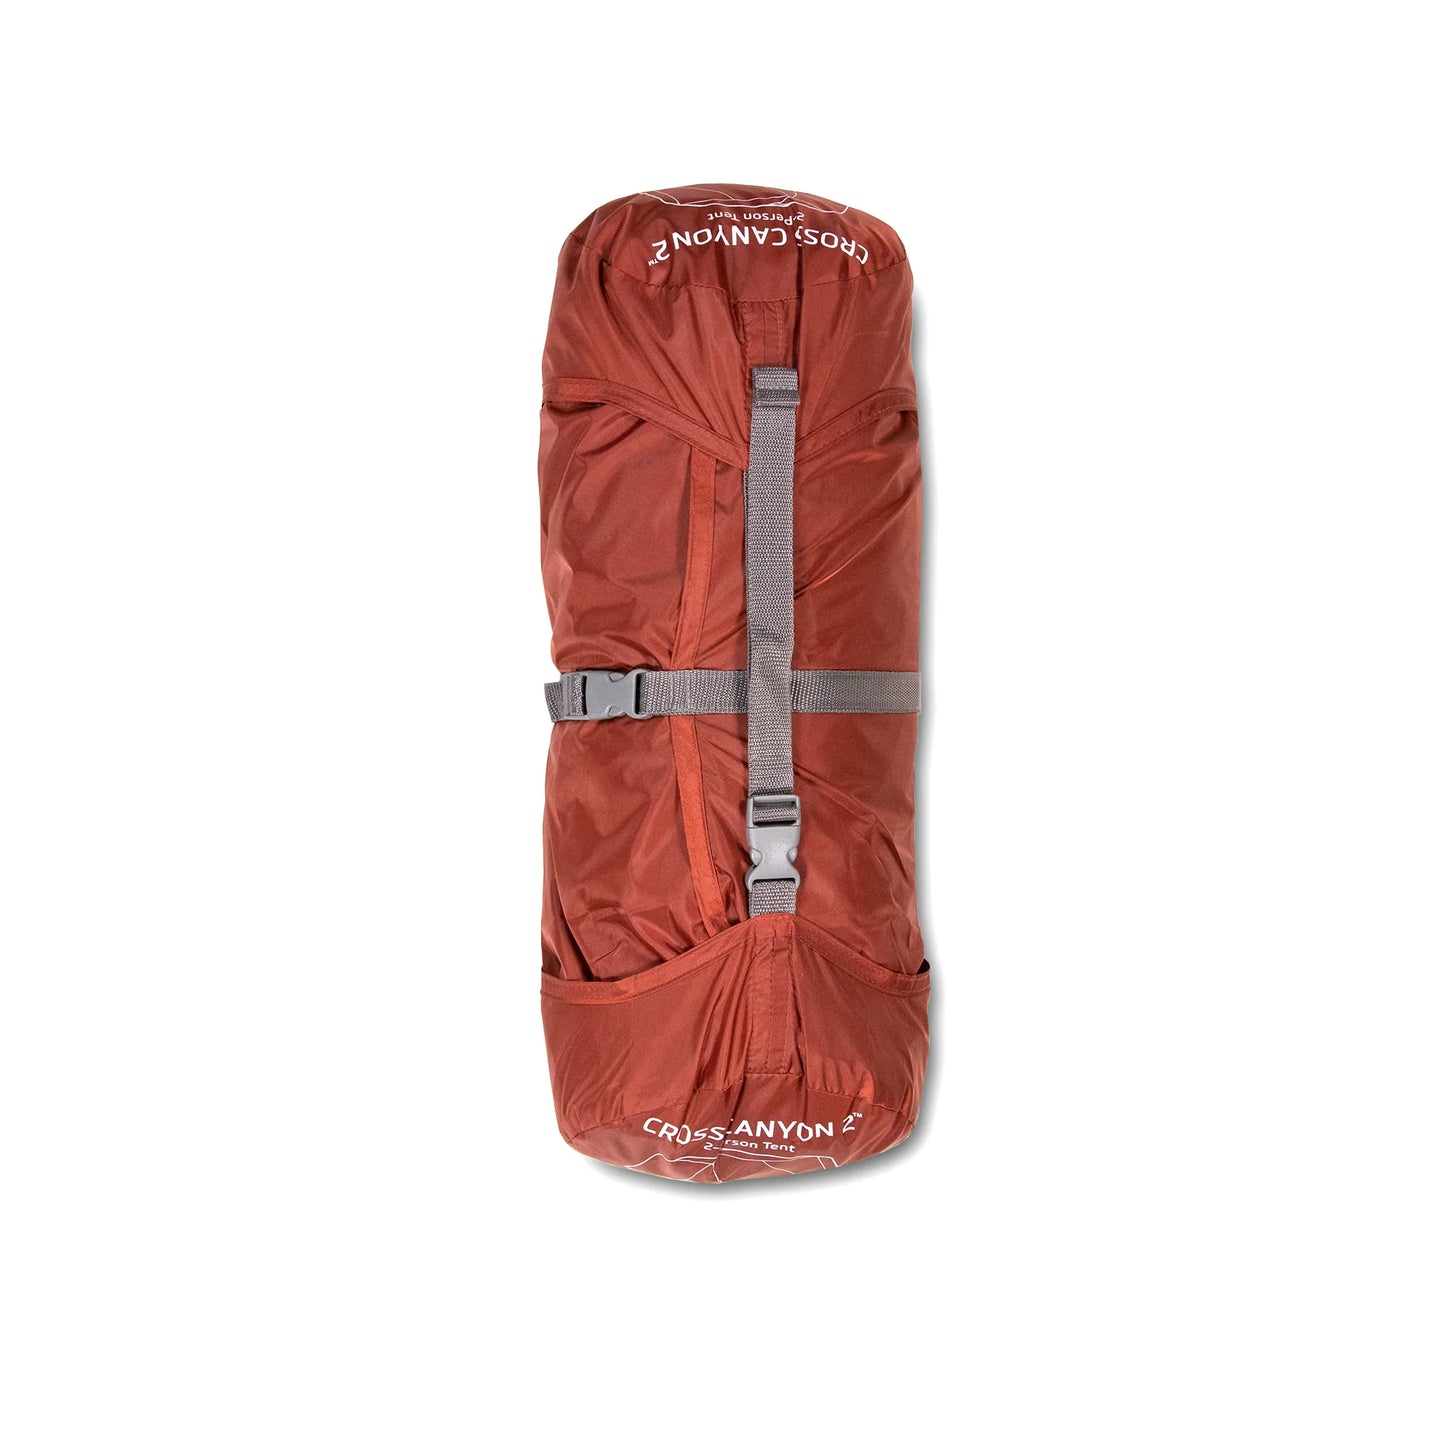 Klymit - Cross Canyon 2 Person Tent